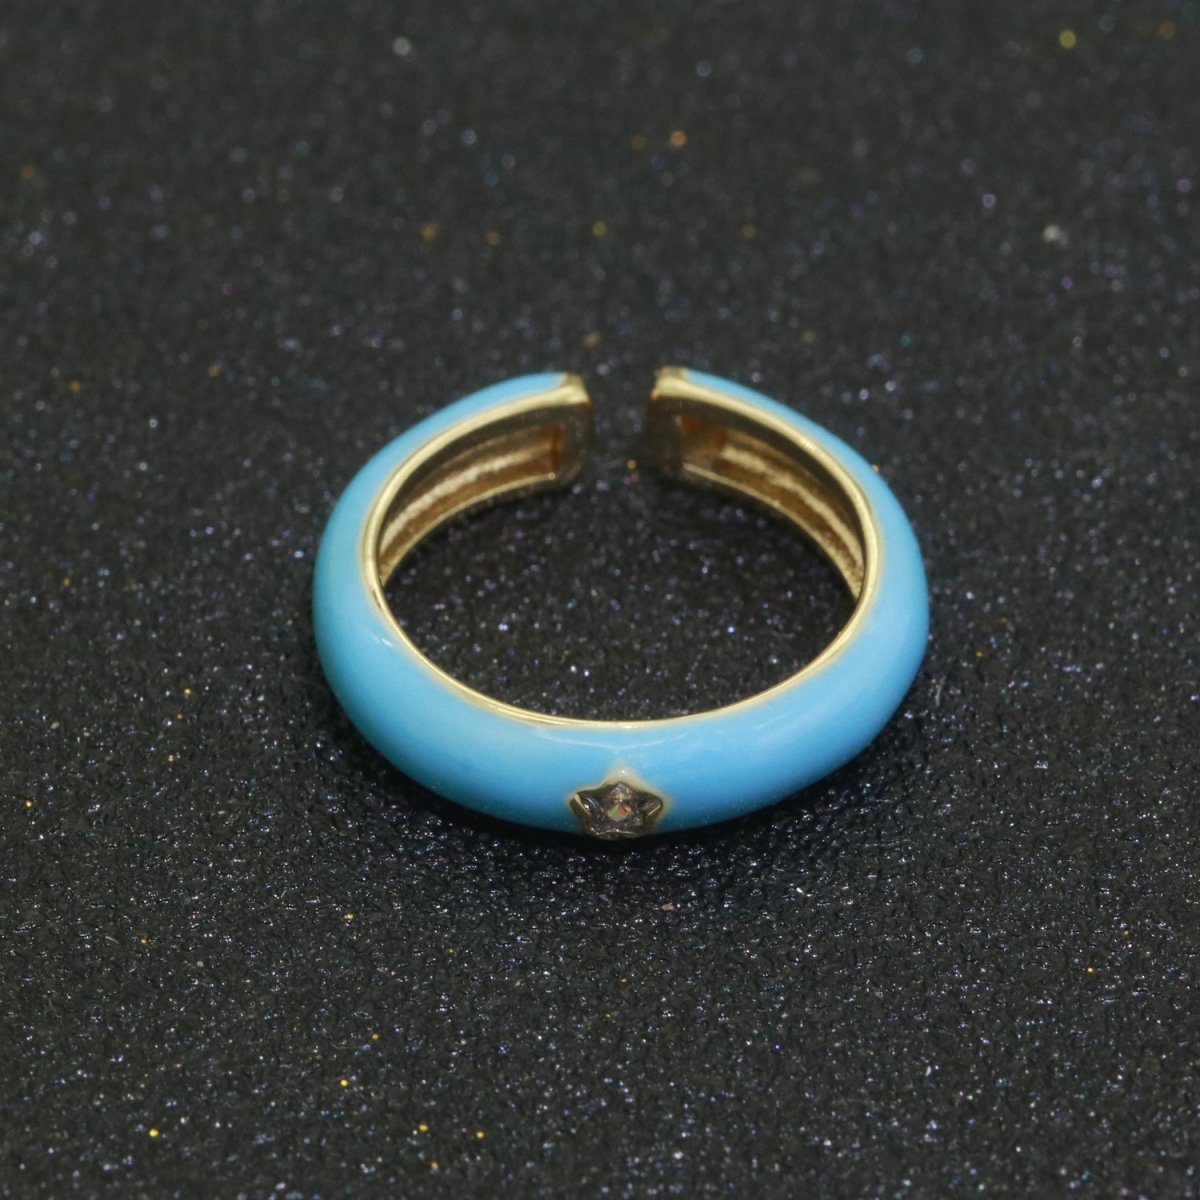 Stacking Enamel Bands Star Ring White Black Blue Teal Band Ring Colorful Jewelry Gold Filled Open Adjustable Ring For Gift S-103~S-107 - DLUXCA